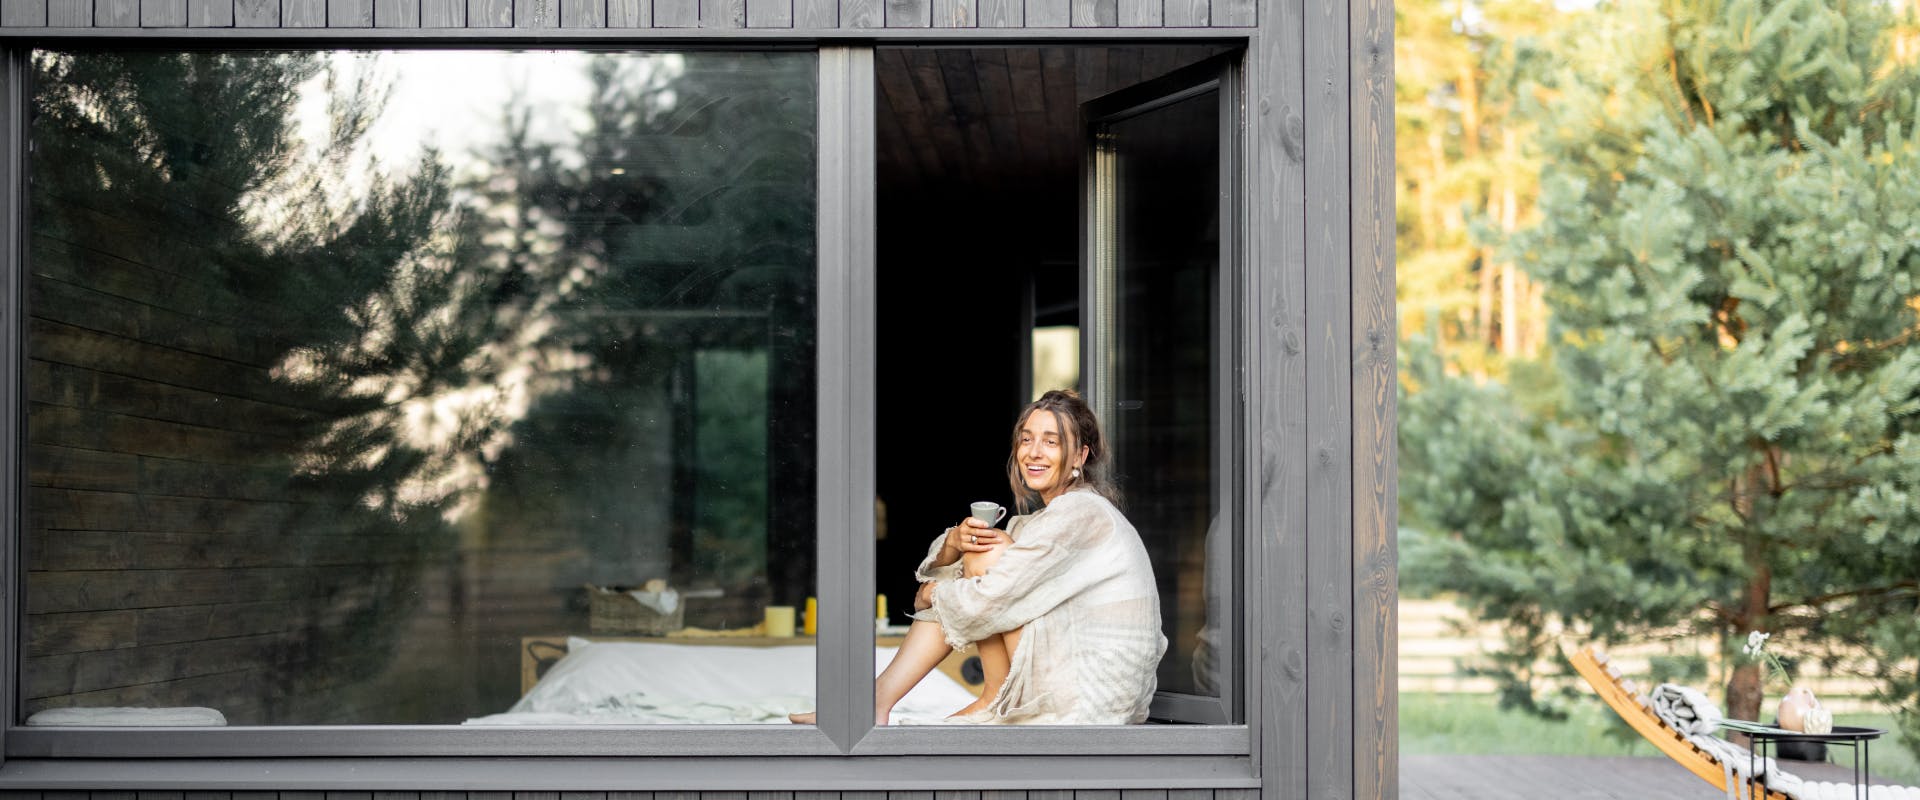 a woman sat in the window of a large wooden rural house in a countryside area